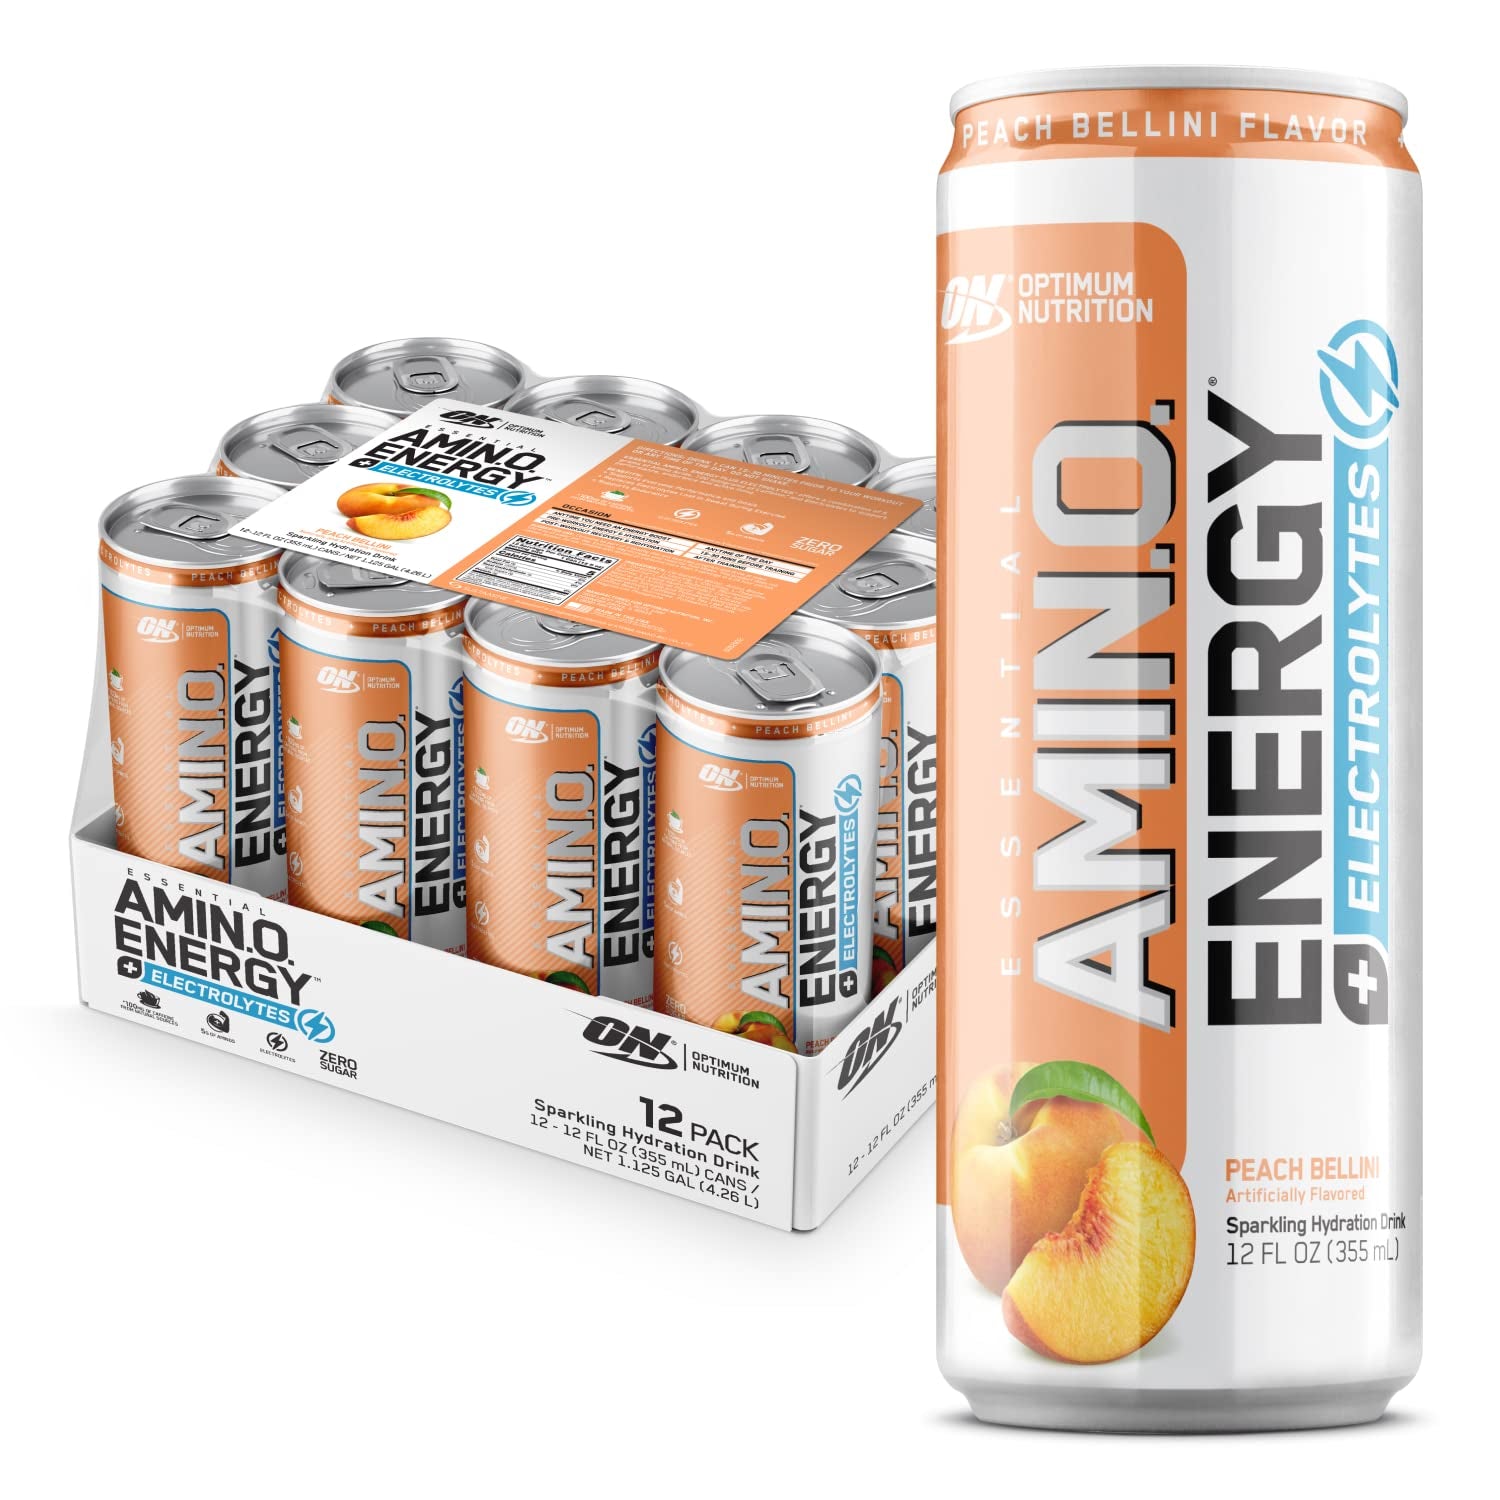 Optimum Nutrition Amino Energy plus Electrolytes Energy Drink Powder, Caffeine for Pre-Workout Energy, Amino Acids / Bcaas for Post-Workout Recovery, Tangerine Wave, 30 Servings (Packaging May Vary) - Free & Fast Delivery